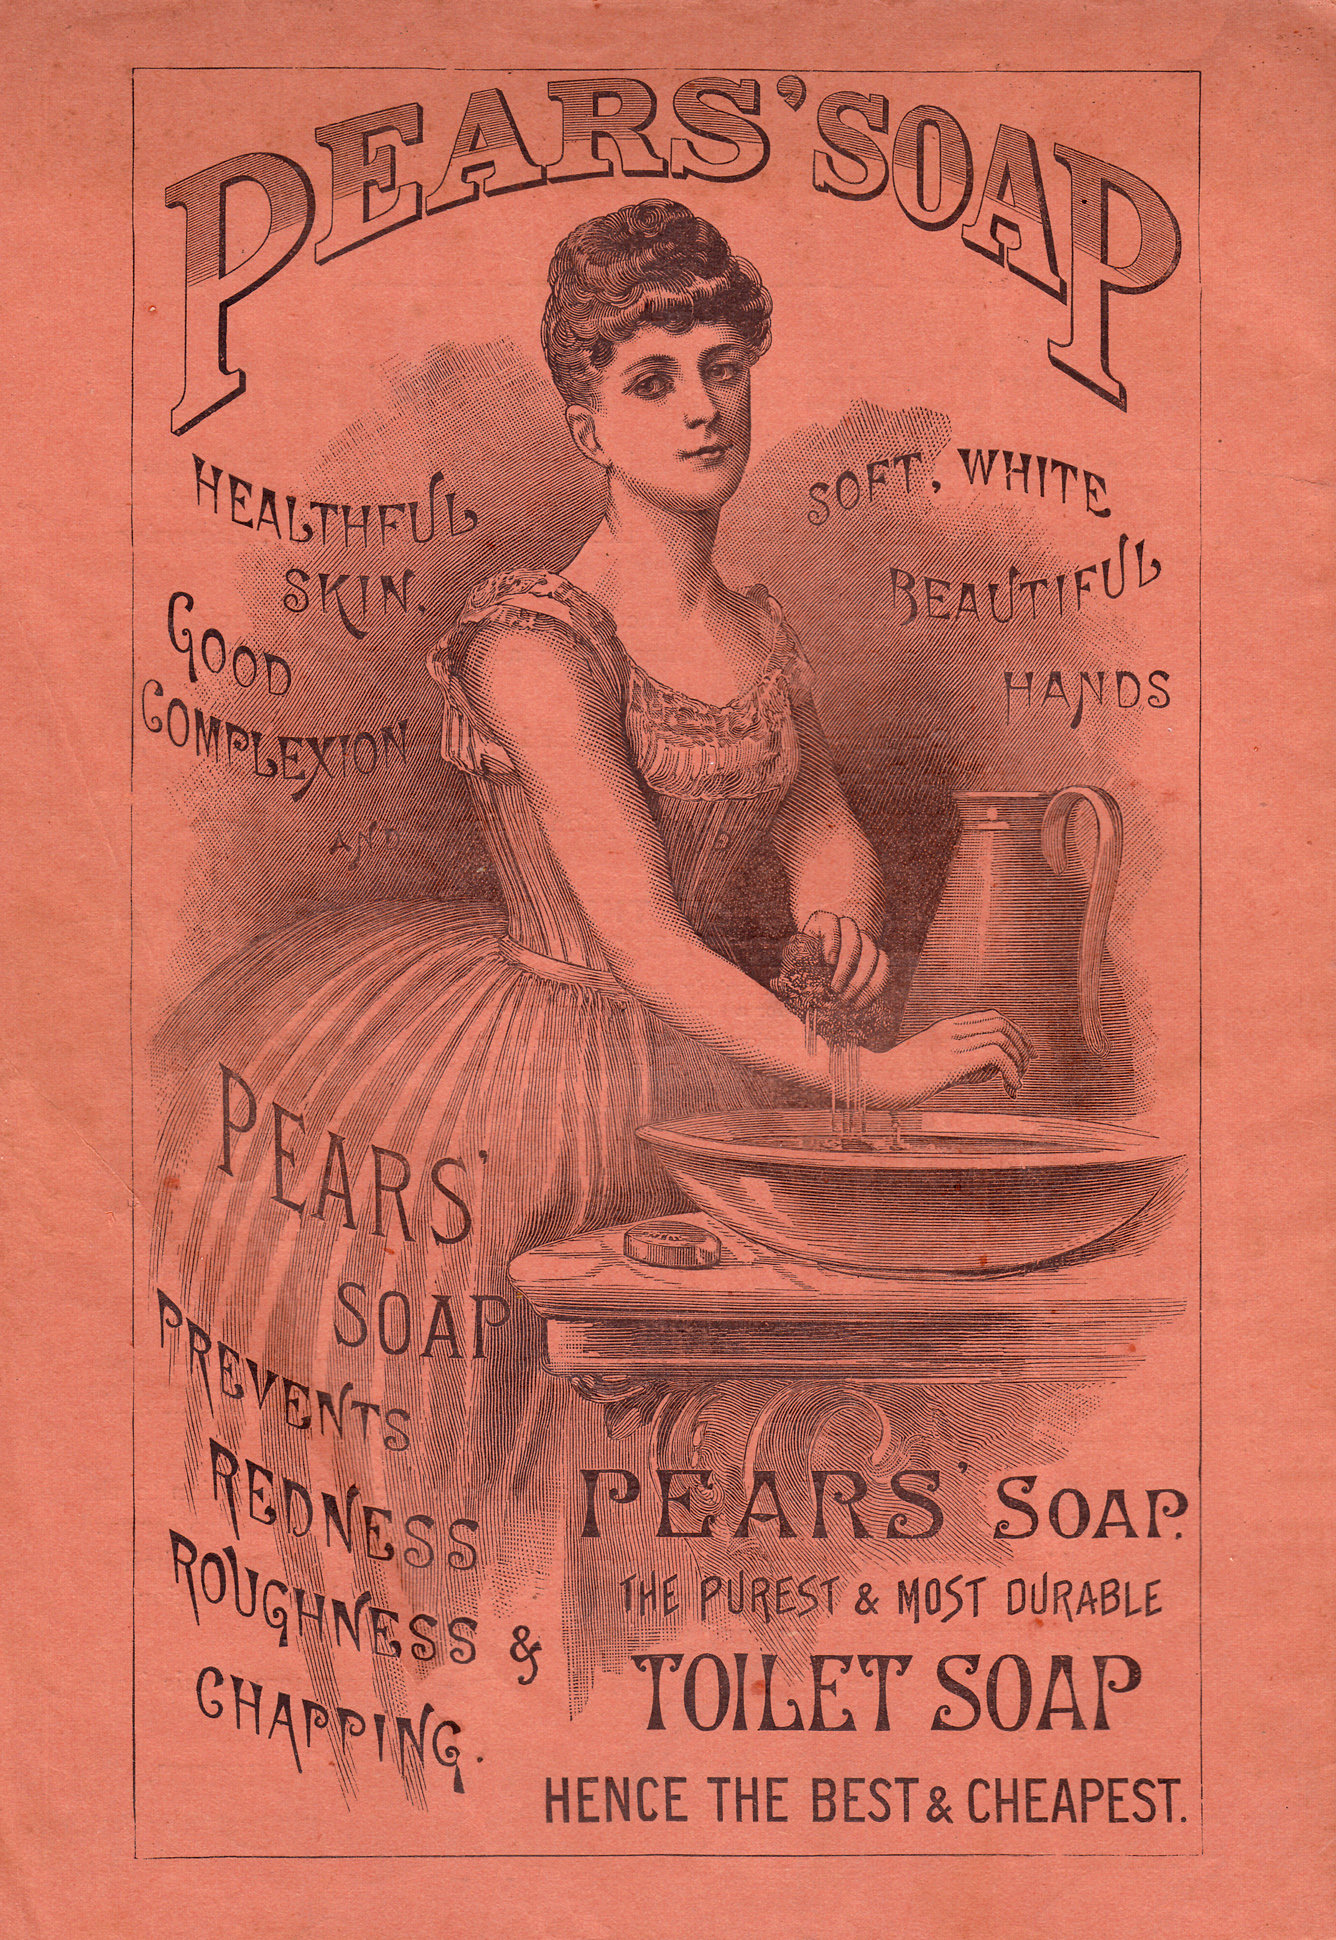 Pear's soap